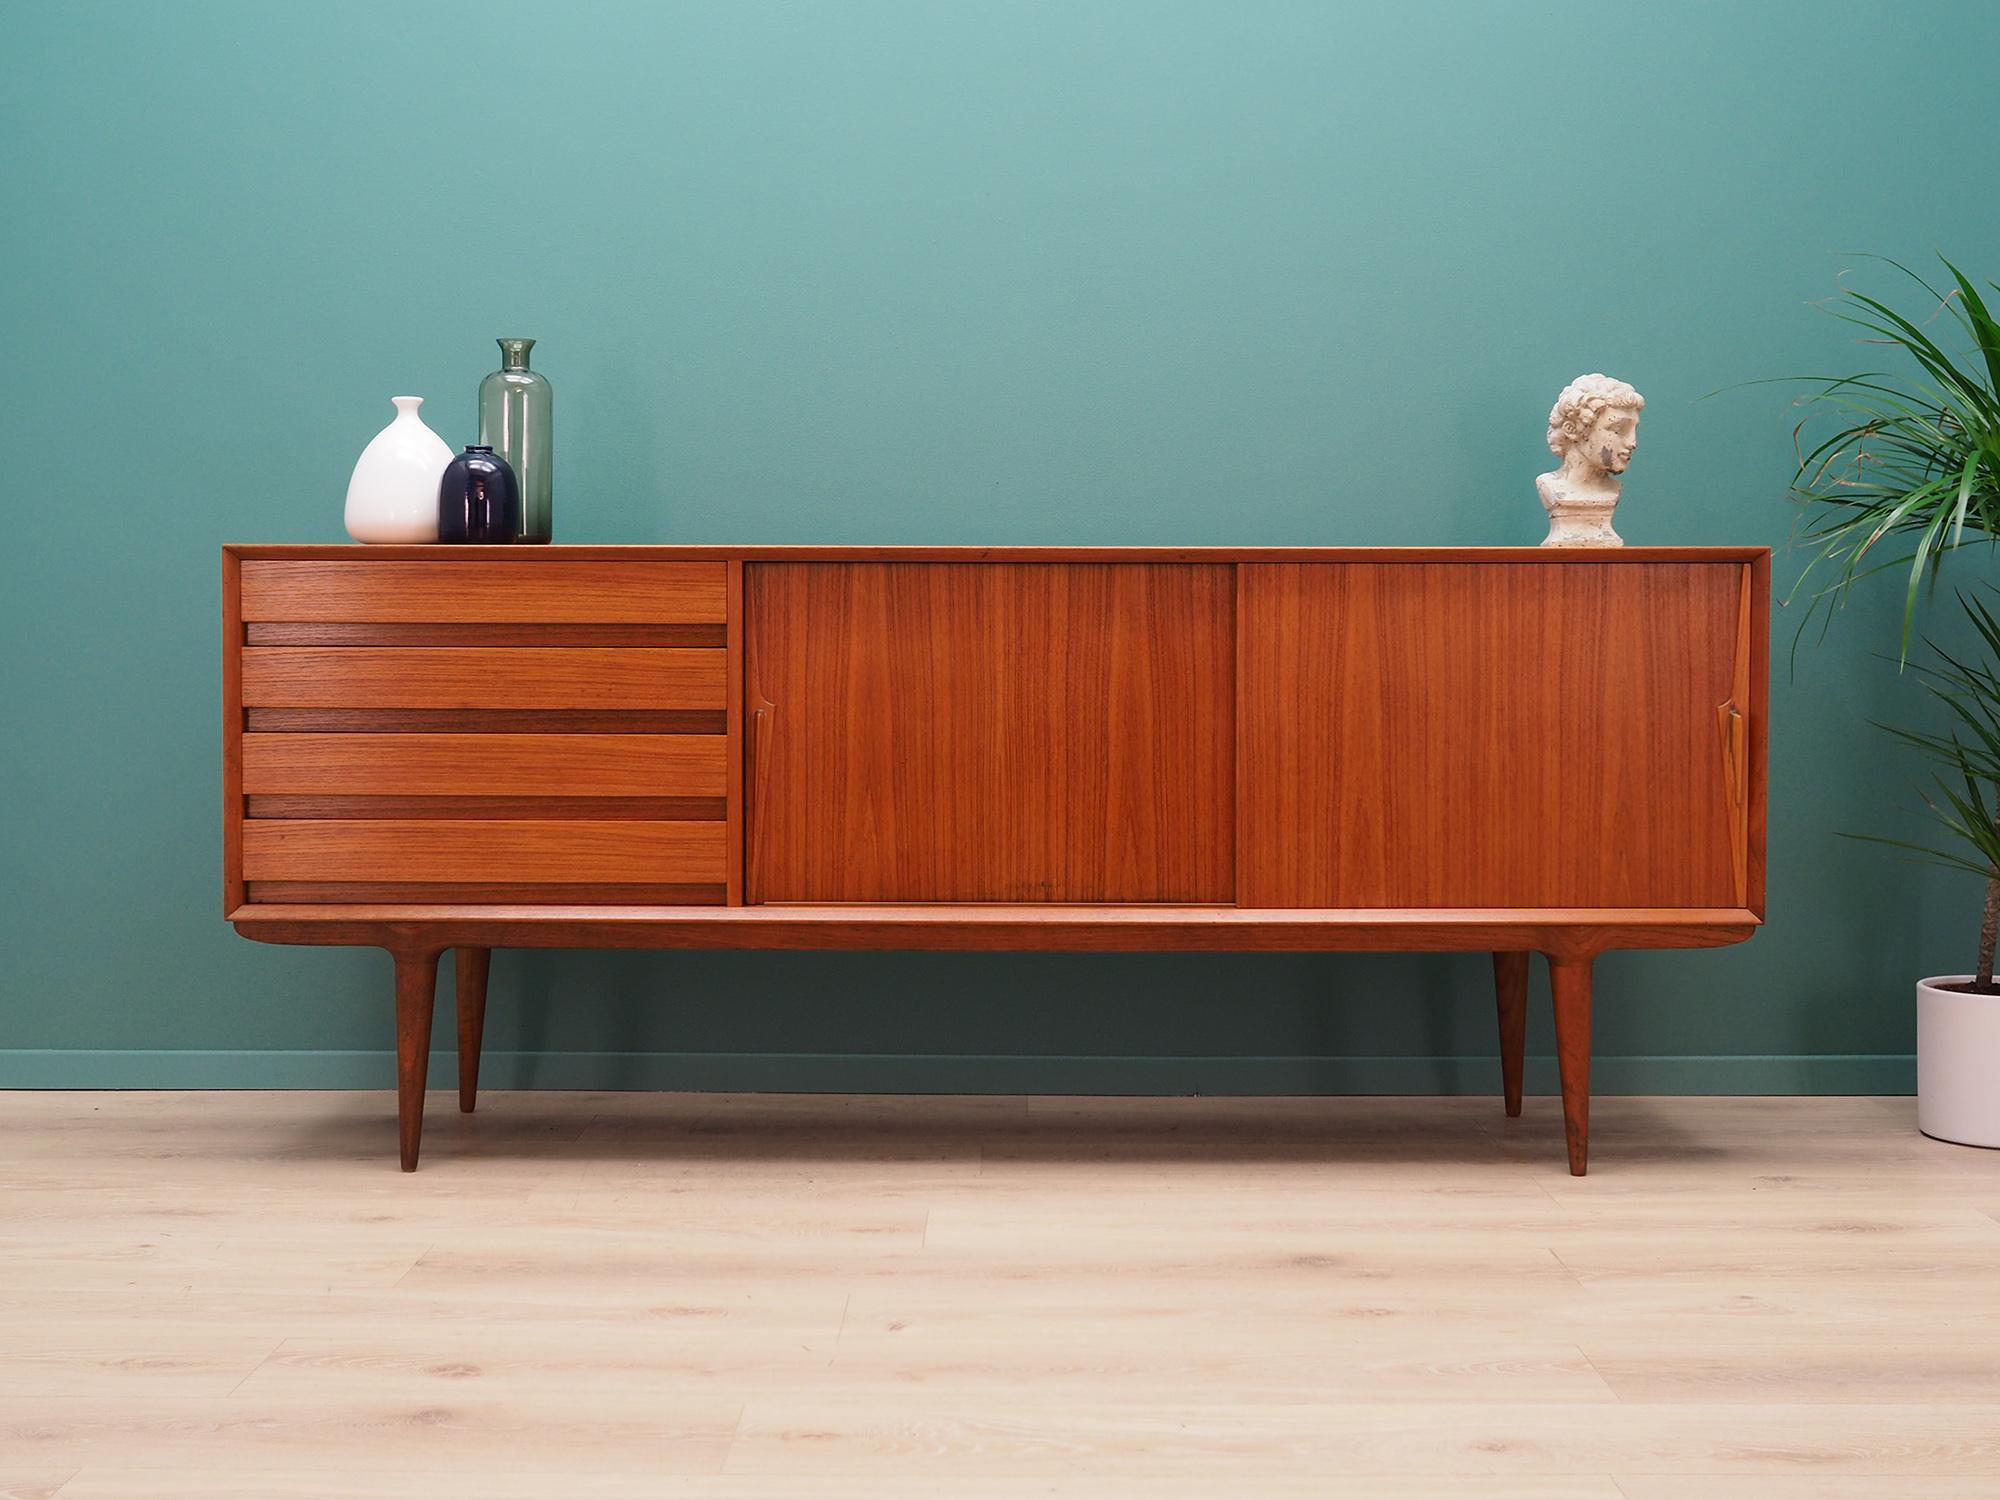 Brilliant sideboard from the 1960s-1970s. Scandinavian design, Minimalist form, excellent workmanship, attention to detail. Model #18 manufactured by Omann Jun. The surface of the furniture is finished with teak veneer. Sideboard has four packed